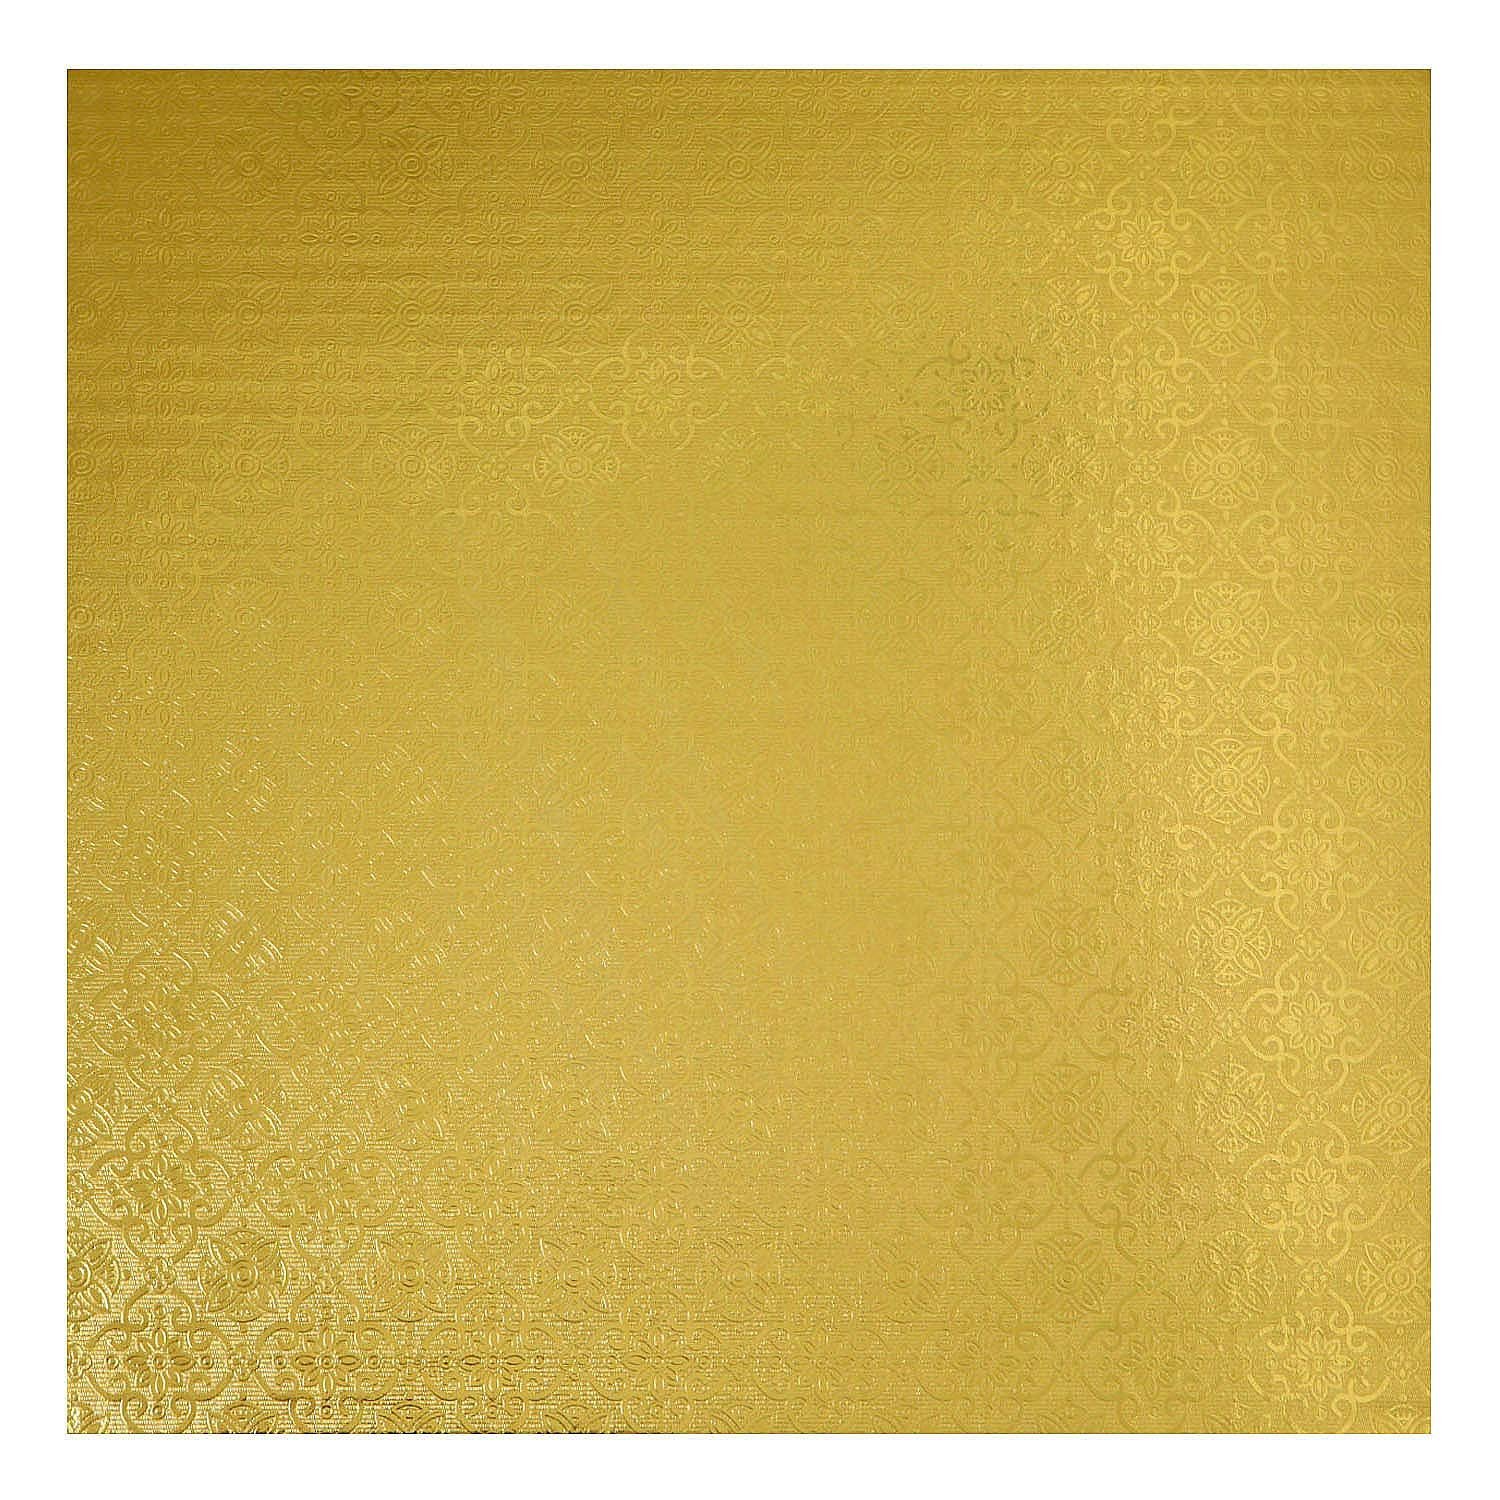 O'Creme Gold Wraparound Square Cake Pastry Drum Board 1/4 Inch Thick, 12 Inch x 12 Inch - Pack of 10 - image 1 of 6